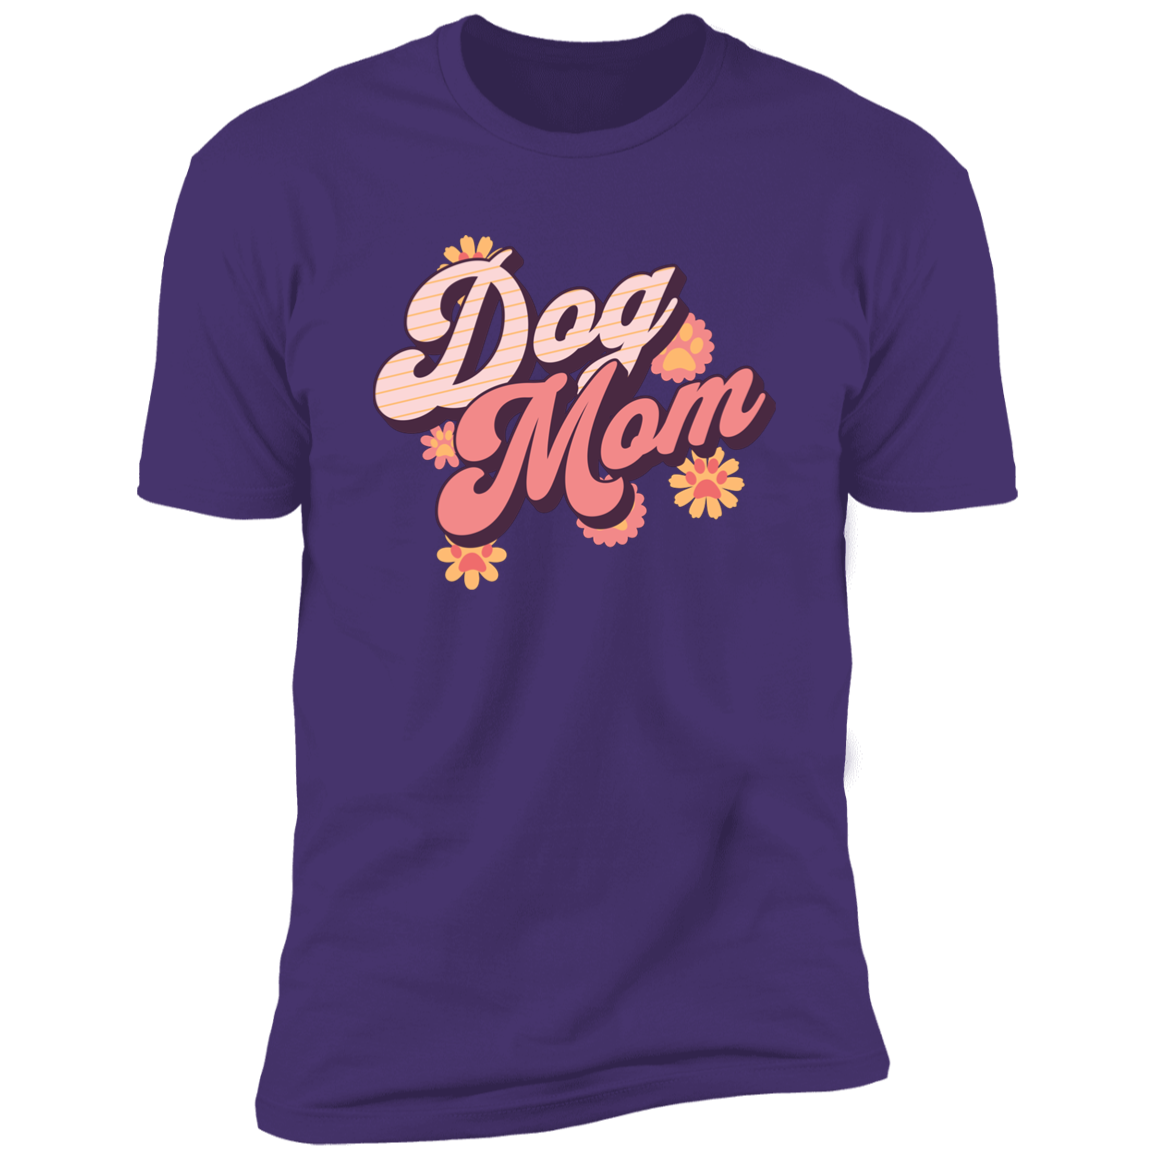 Retro Dog Mom t-shirt, Dog Mom shirt, Dog T-shirt for humans, in purple Rush